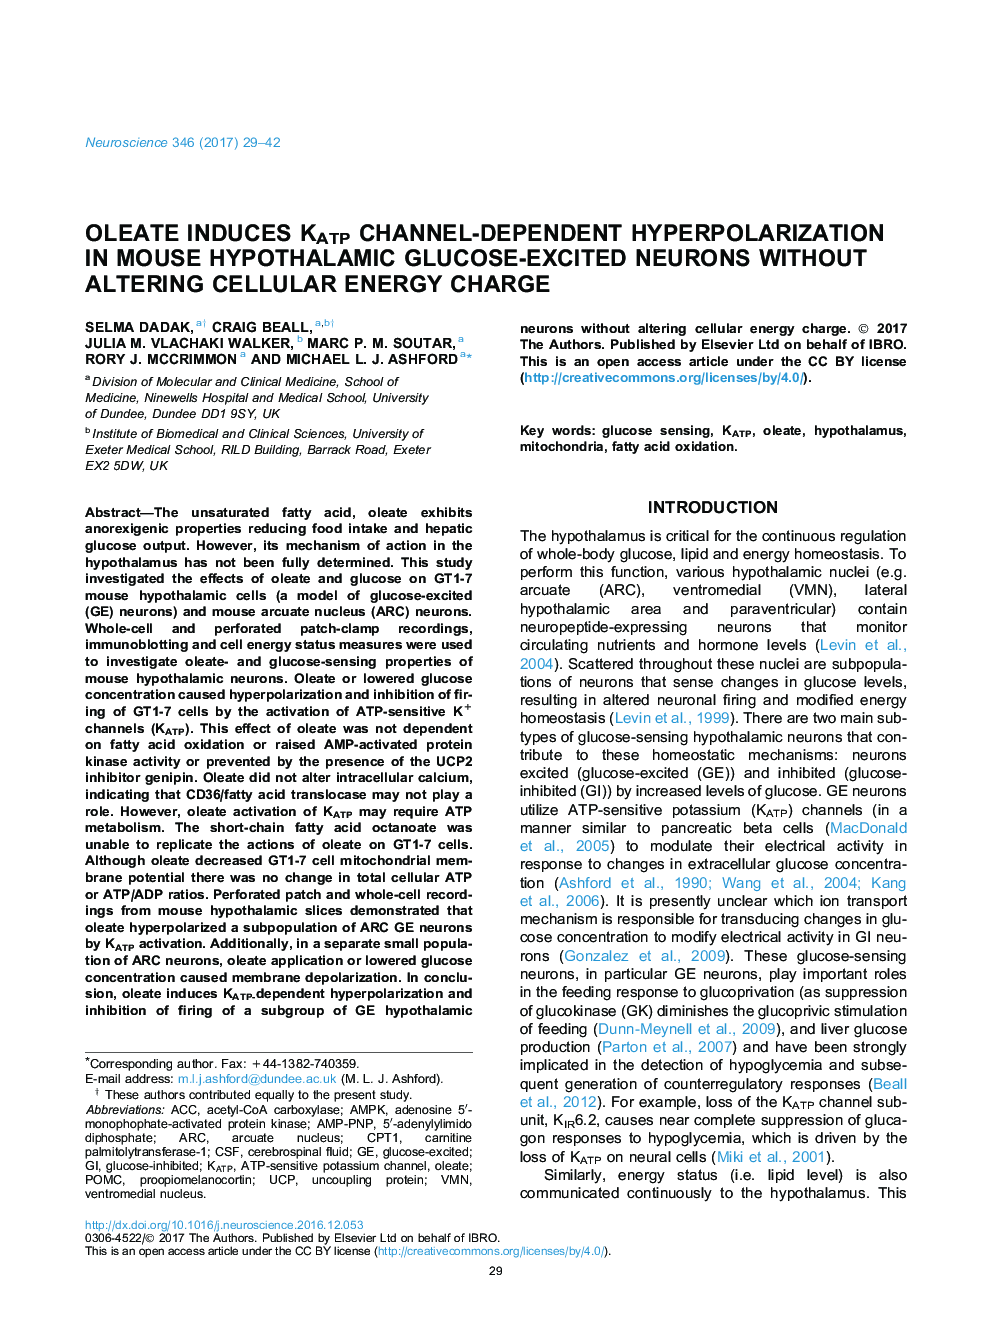 Oleate induces KATP channel-dependent hyperpolarization in mouse hypothalamic glucose-excited neurons without altering cellular energy charge